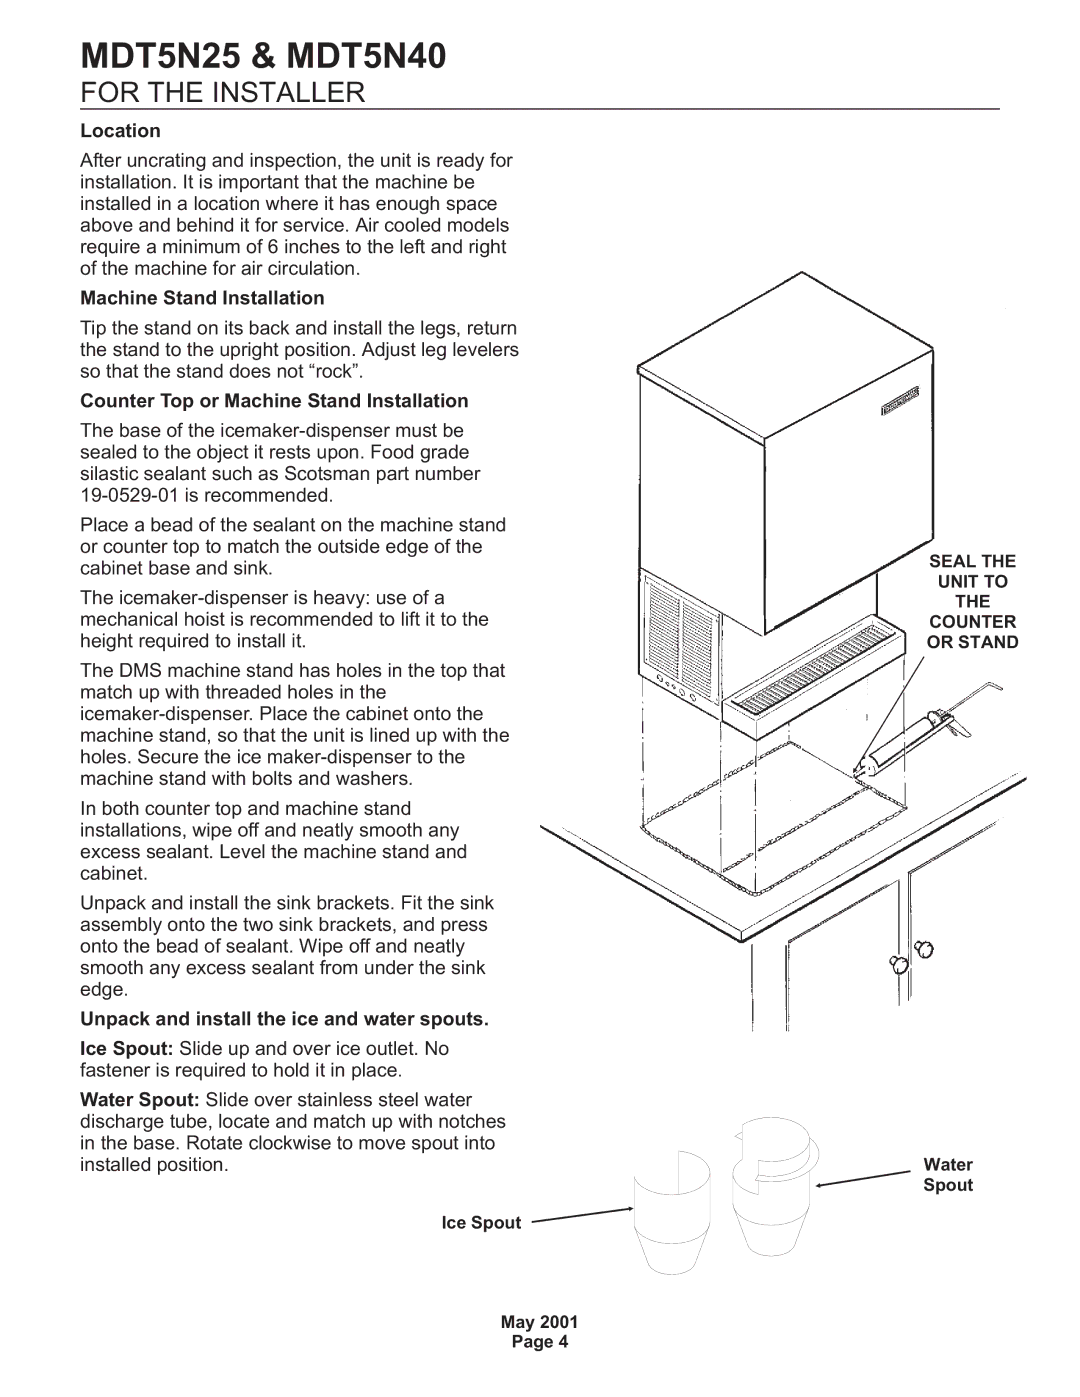 Scotsman Ice MDT5N25, MDT5N40 service manual For the Installer, Location, Counter Top or Machine Stand Installation 